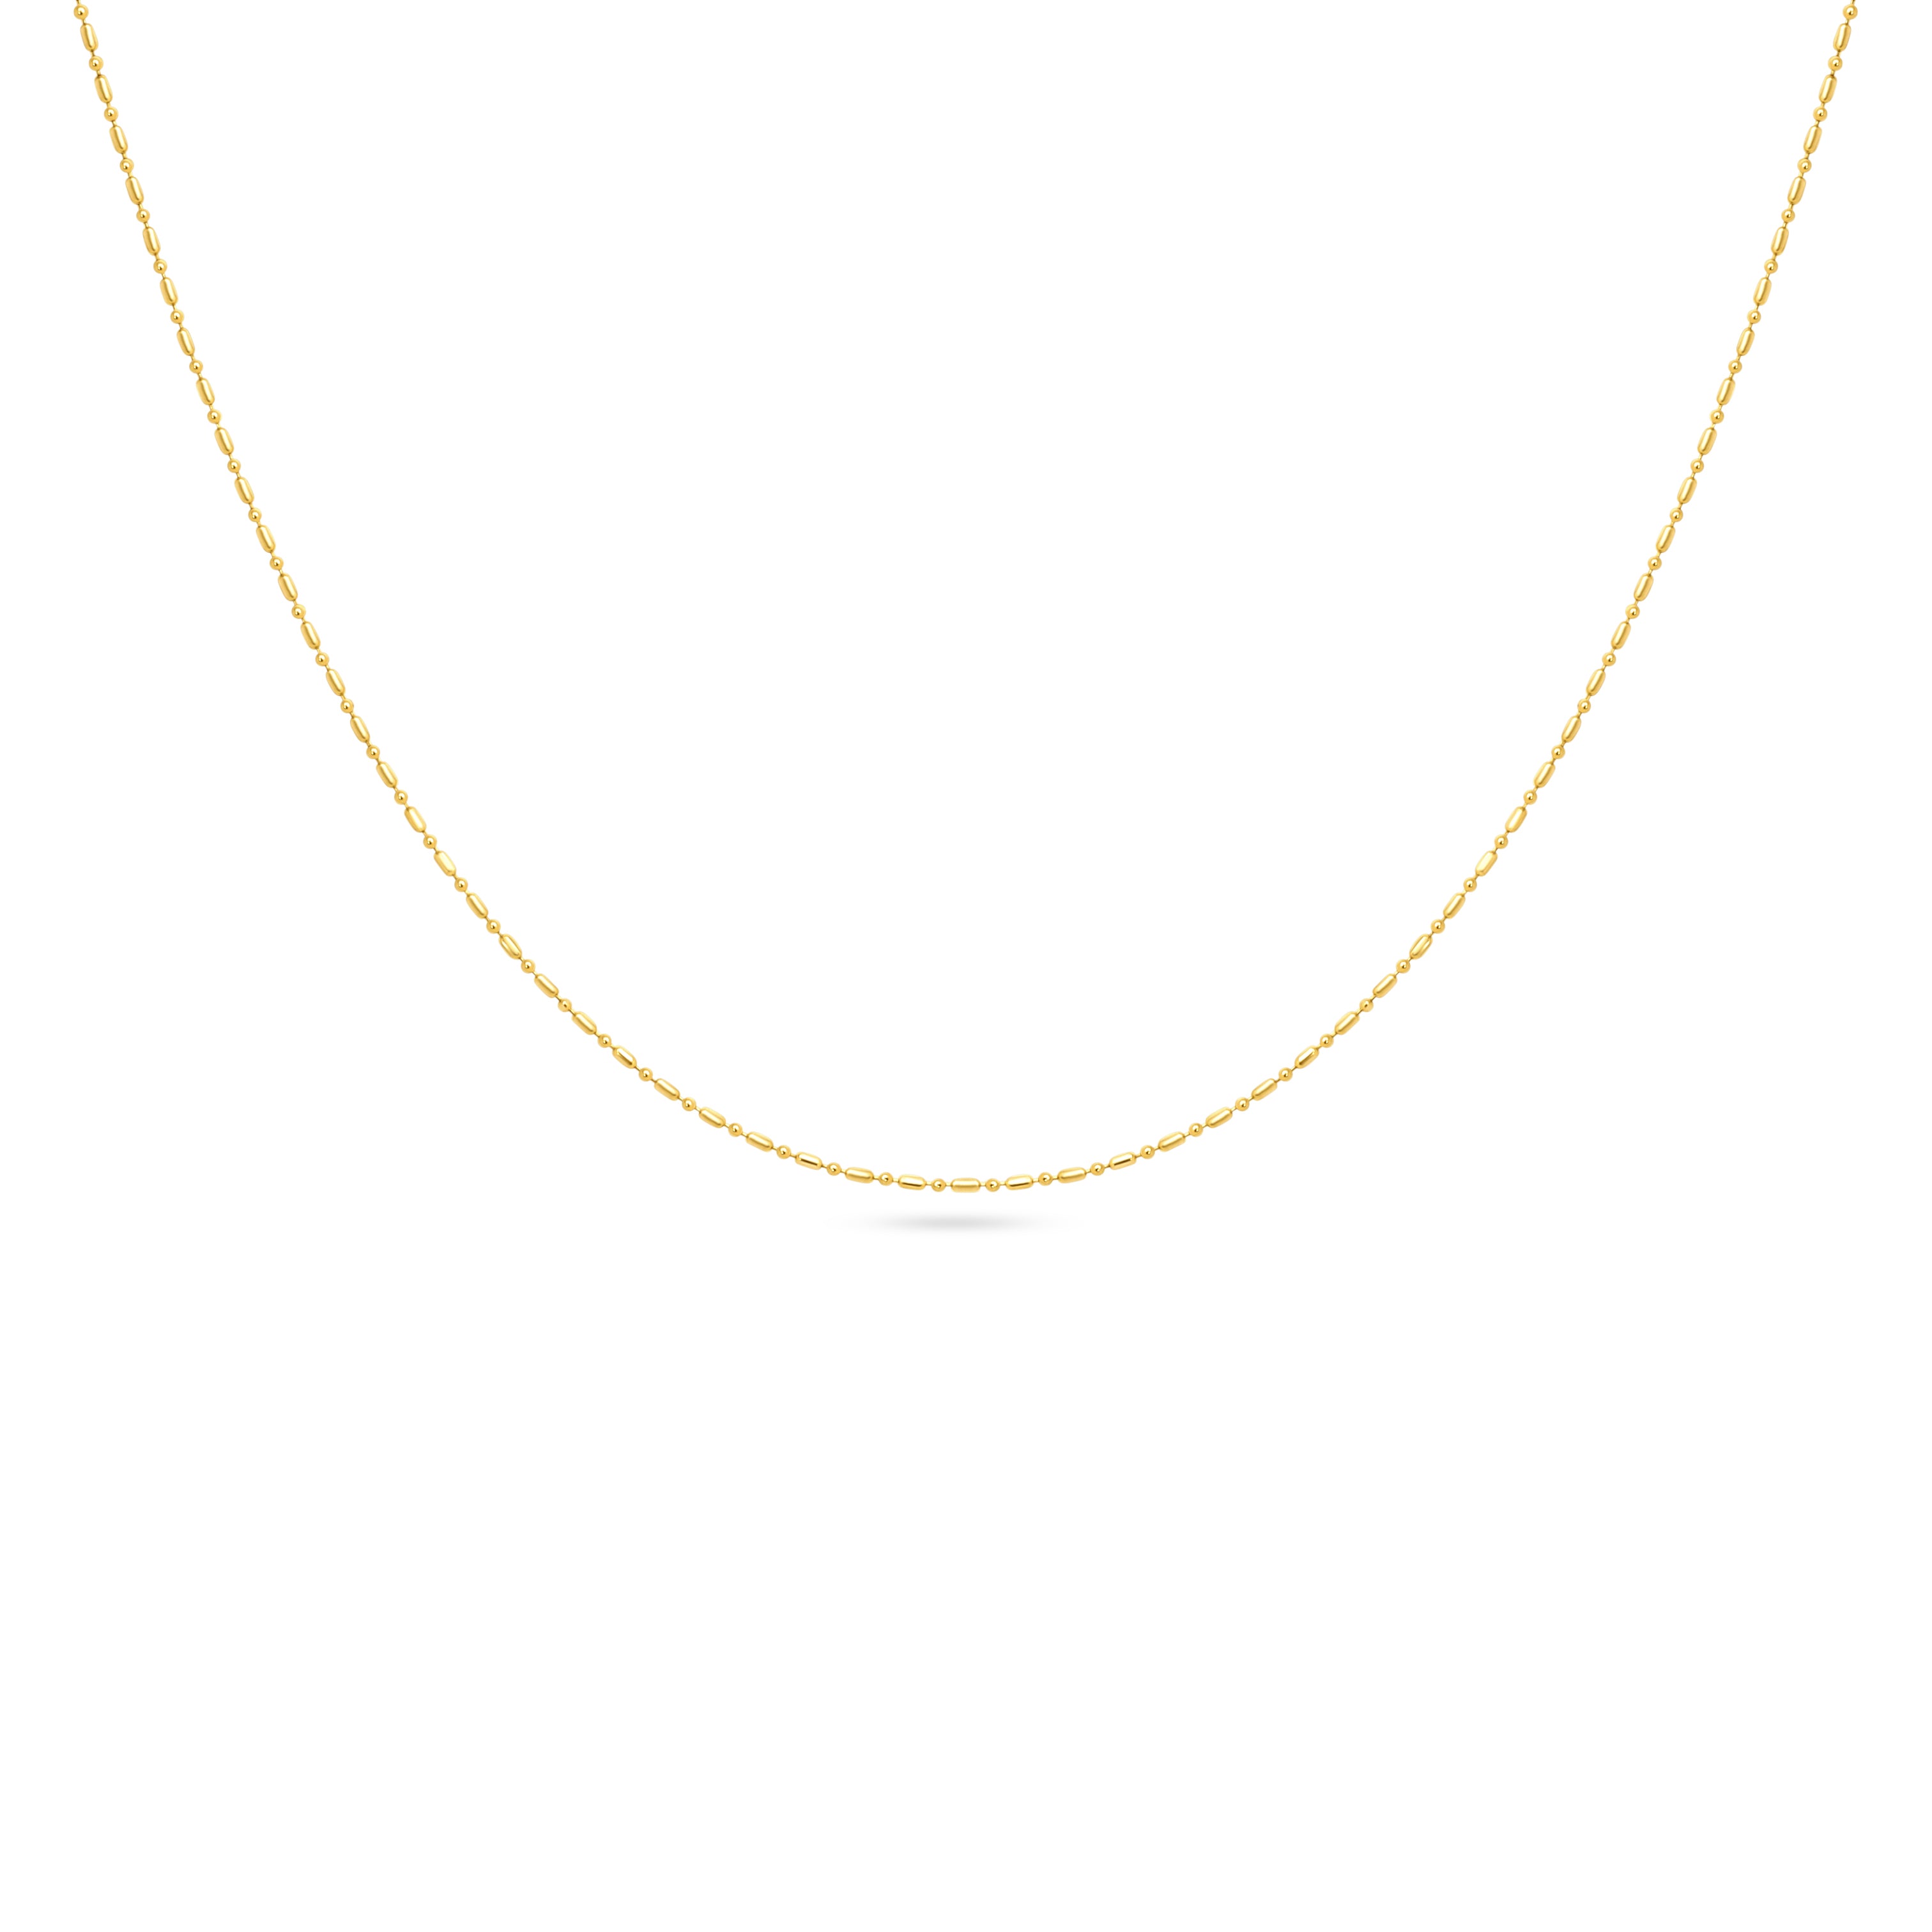 Dash-Dot Gold Bead Chain Necklace